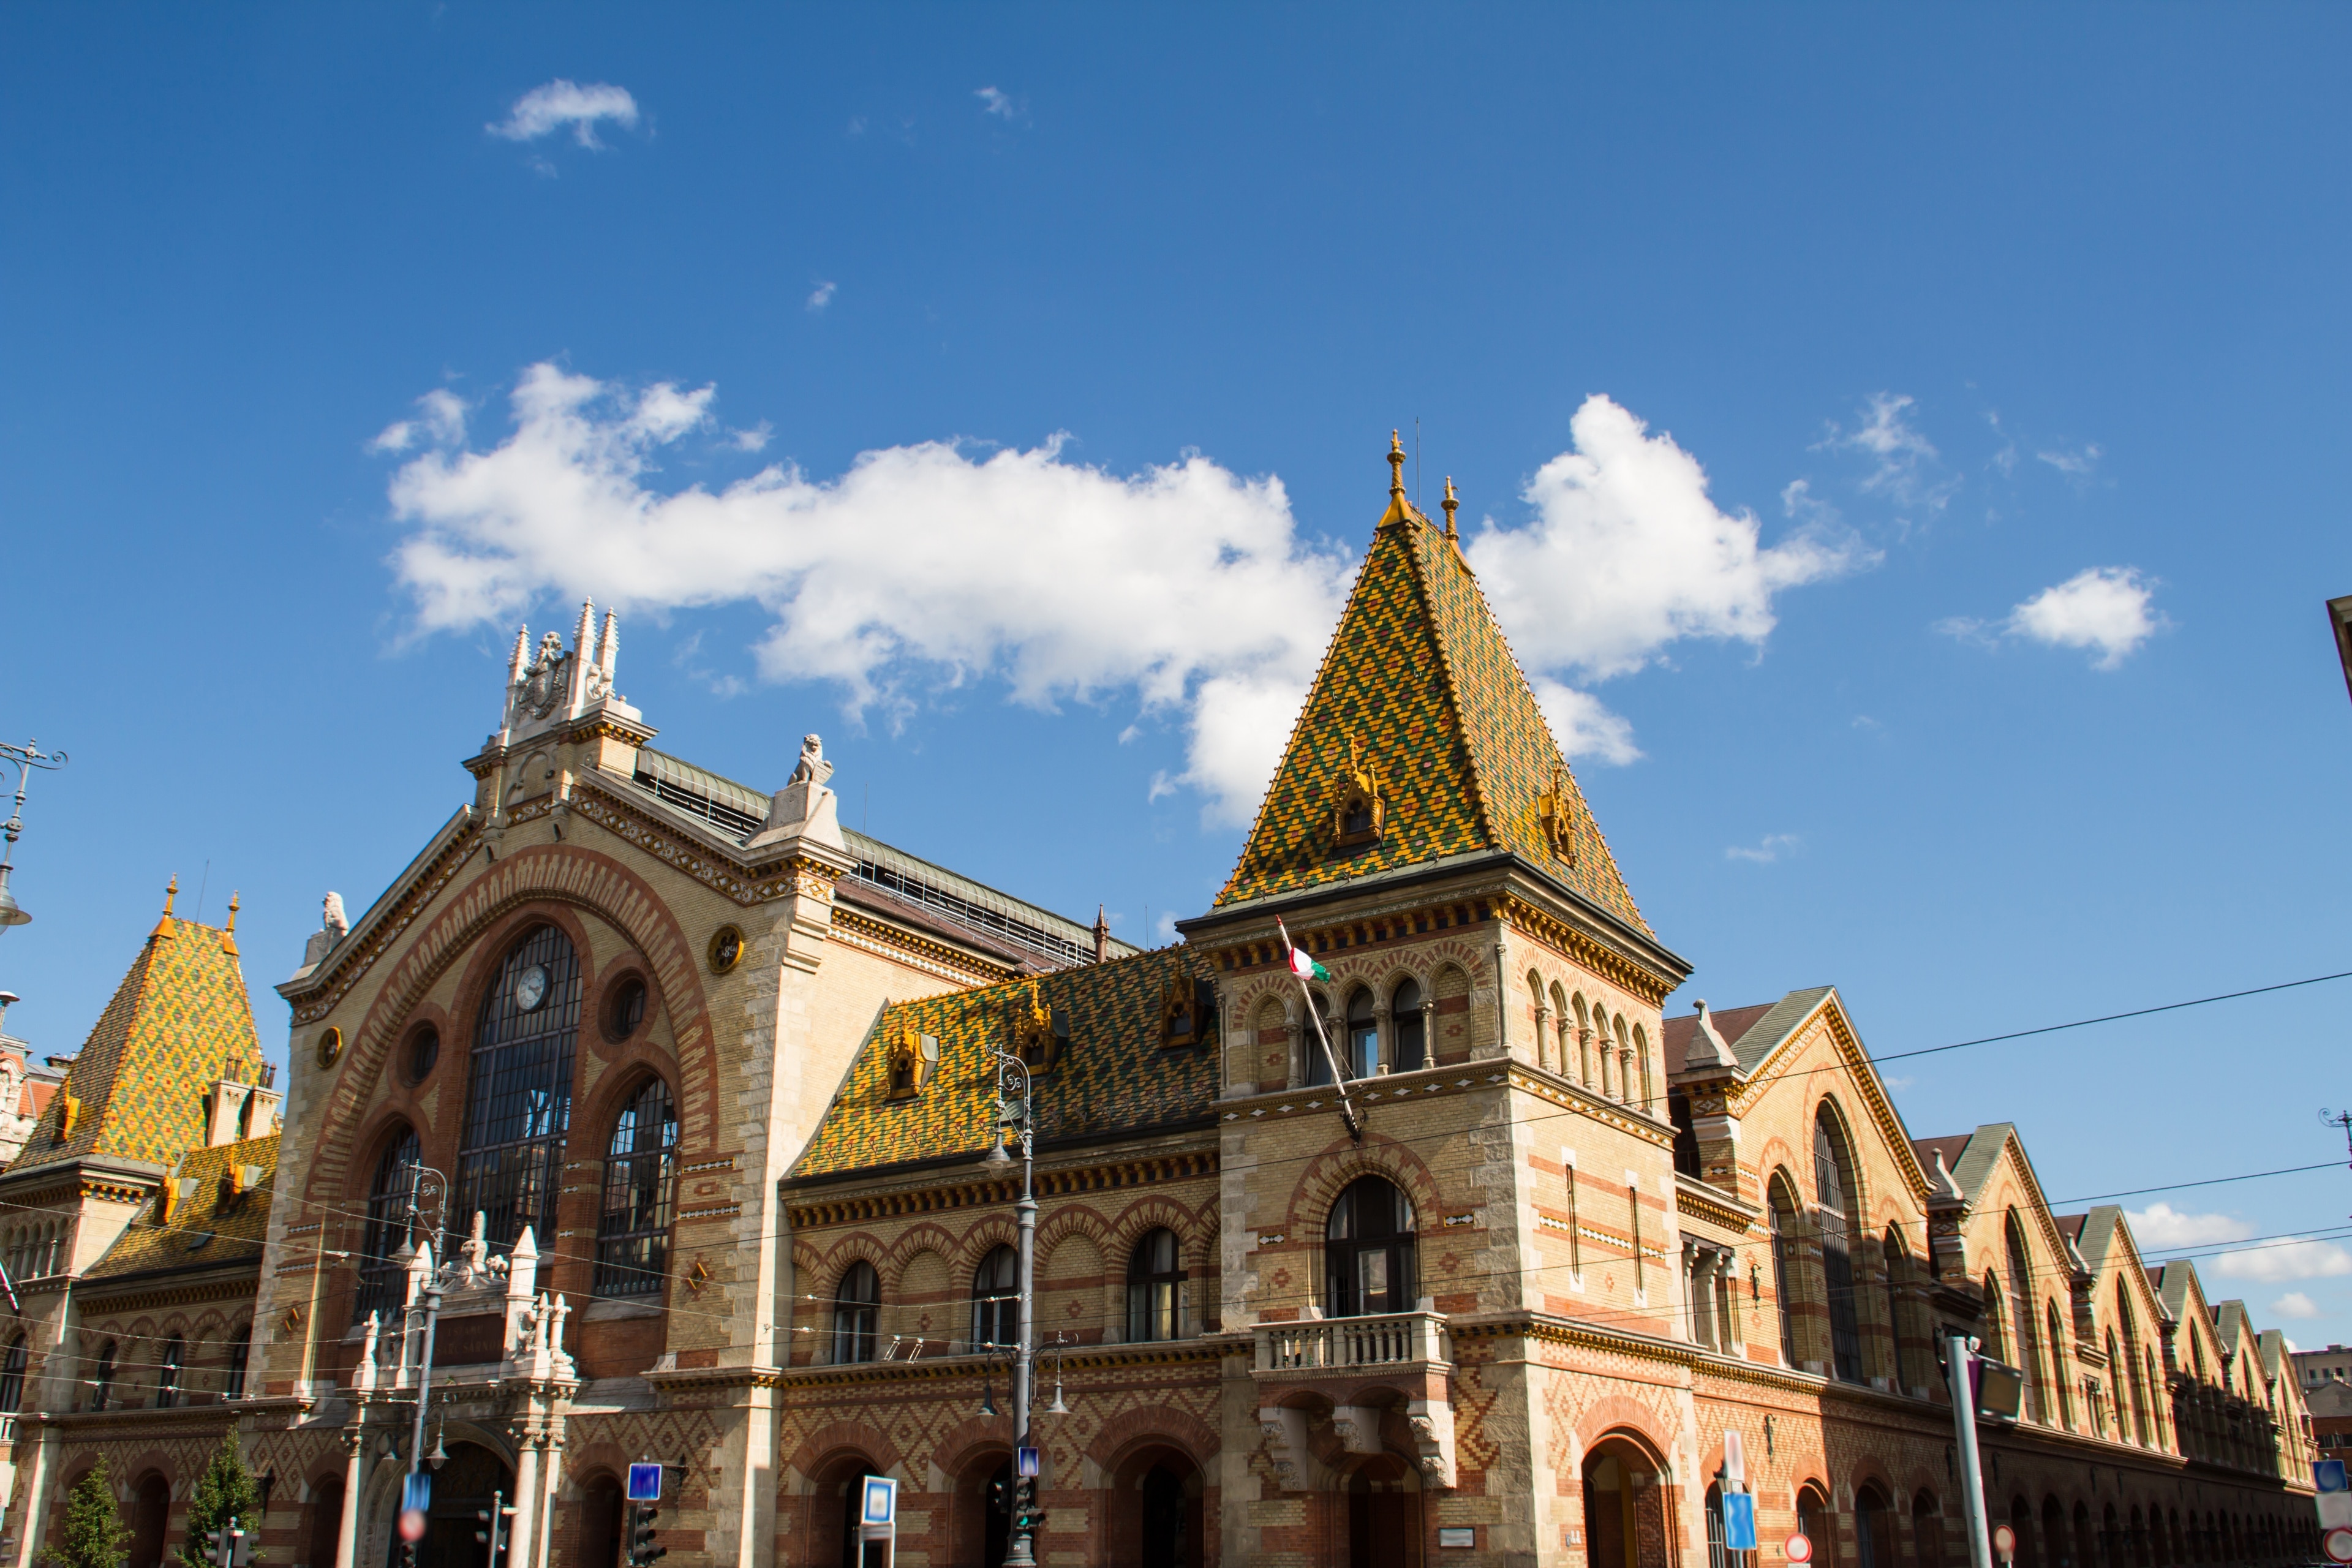 With a visit to Great Market Hall, a favorite shopping spot in Budapest City Centre, you can browse for souvenirs. Experience the area's entertainment choices and acclaimed theater scene. 